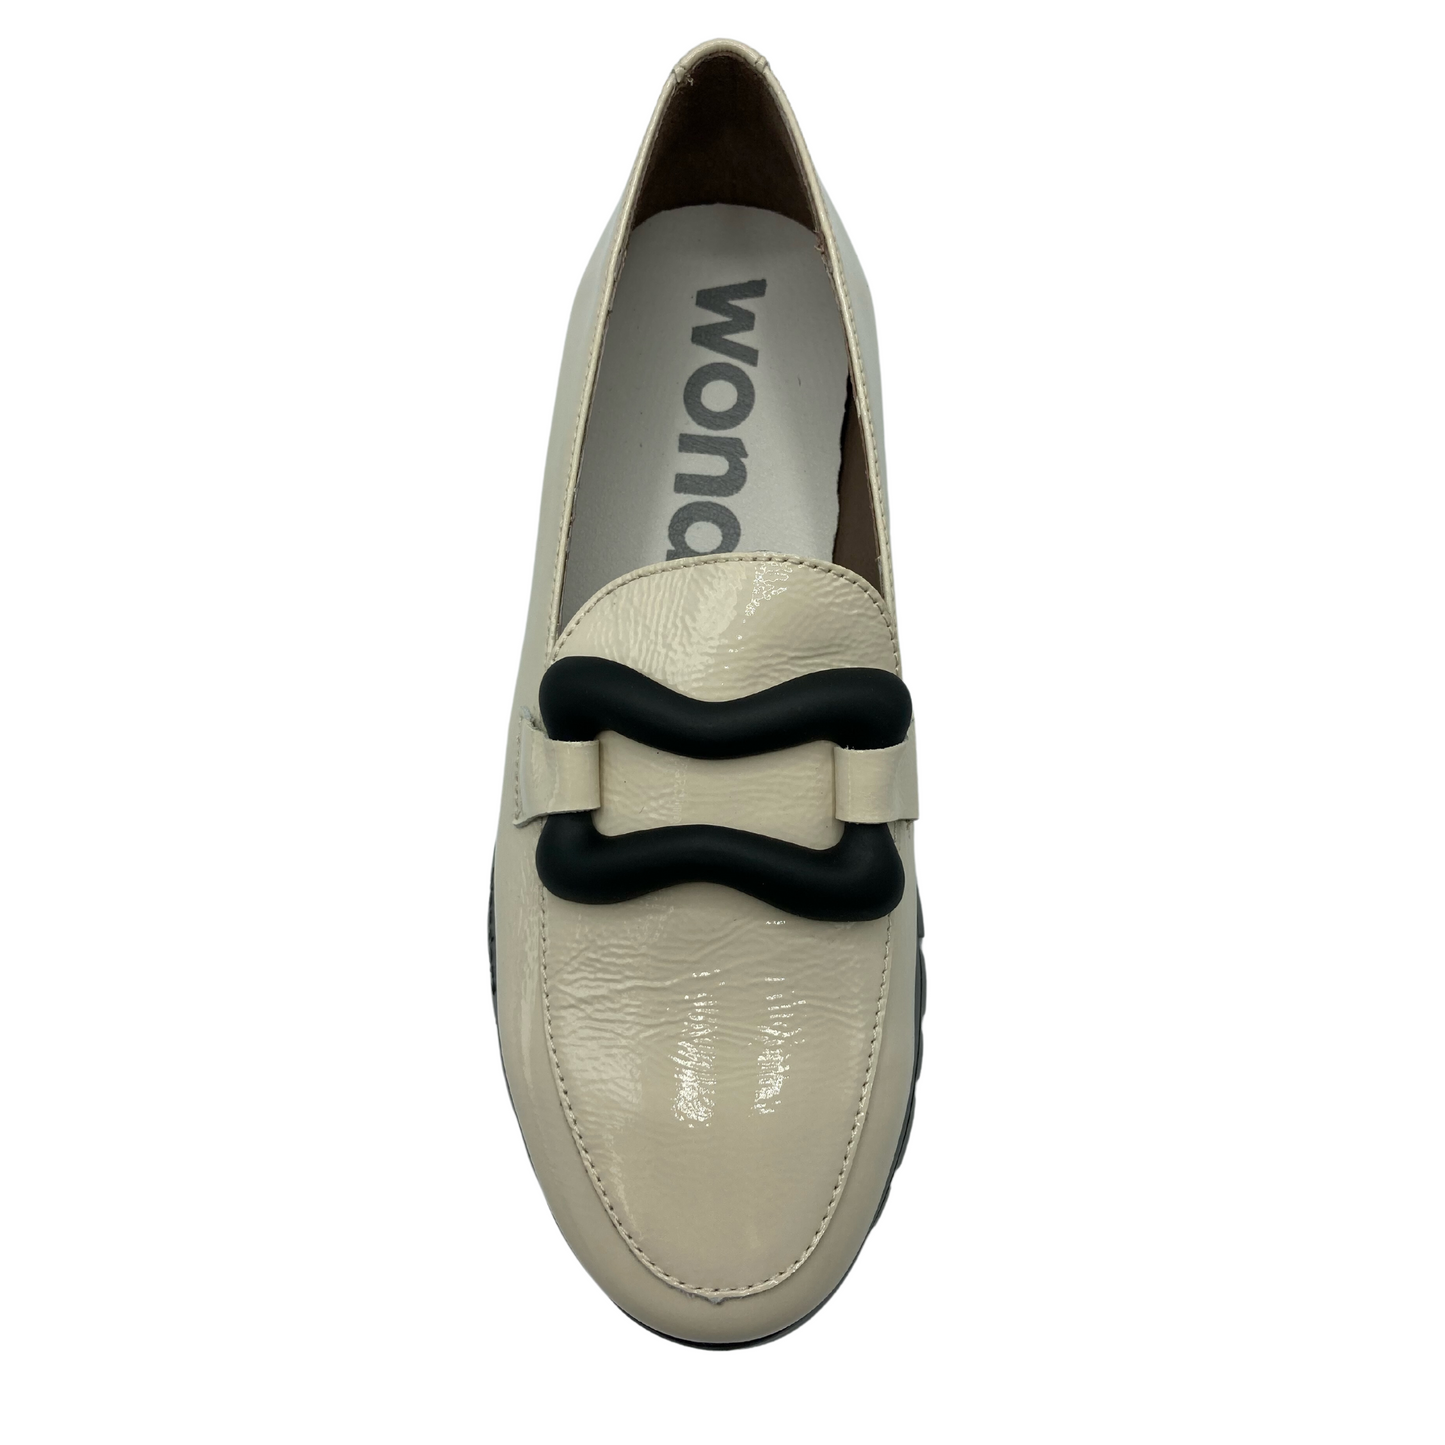 Top down view of milk coloured loafer with black buckle detail